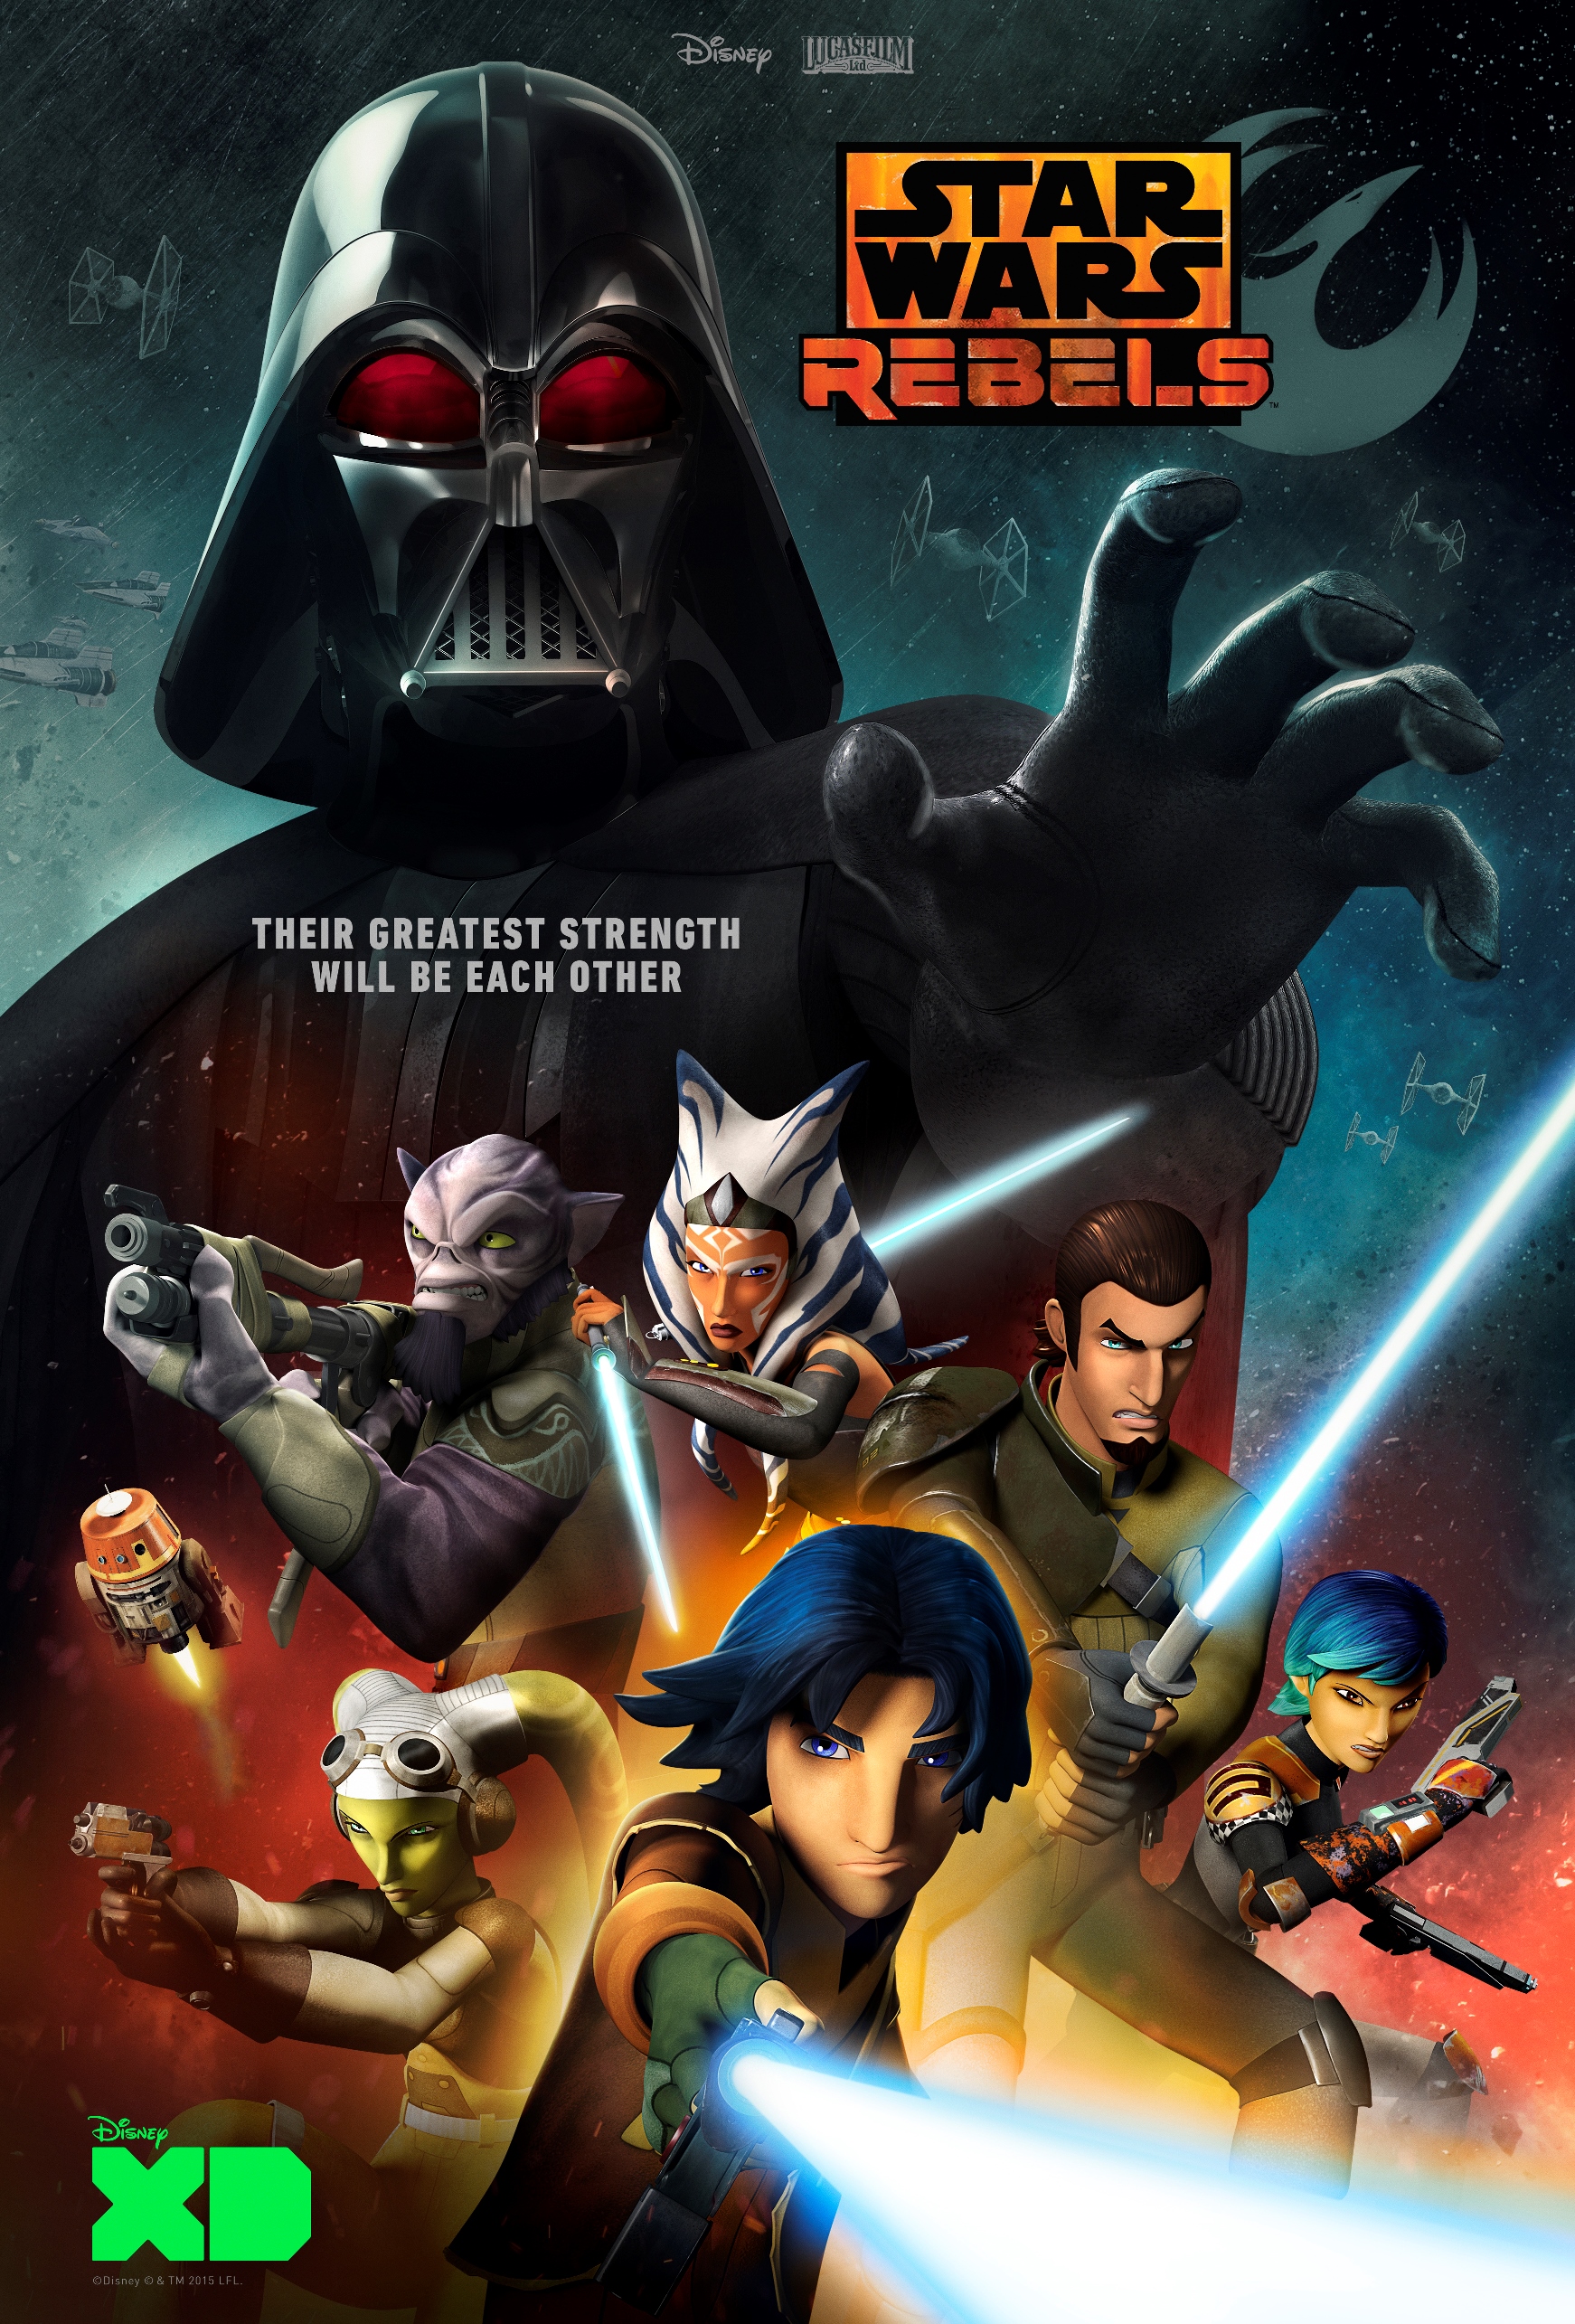 Rebels - Official Star Wars Rebels Discussion Thread 